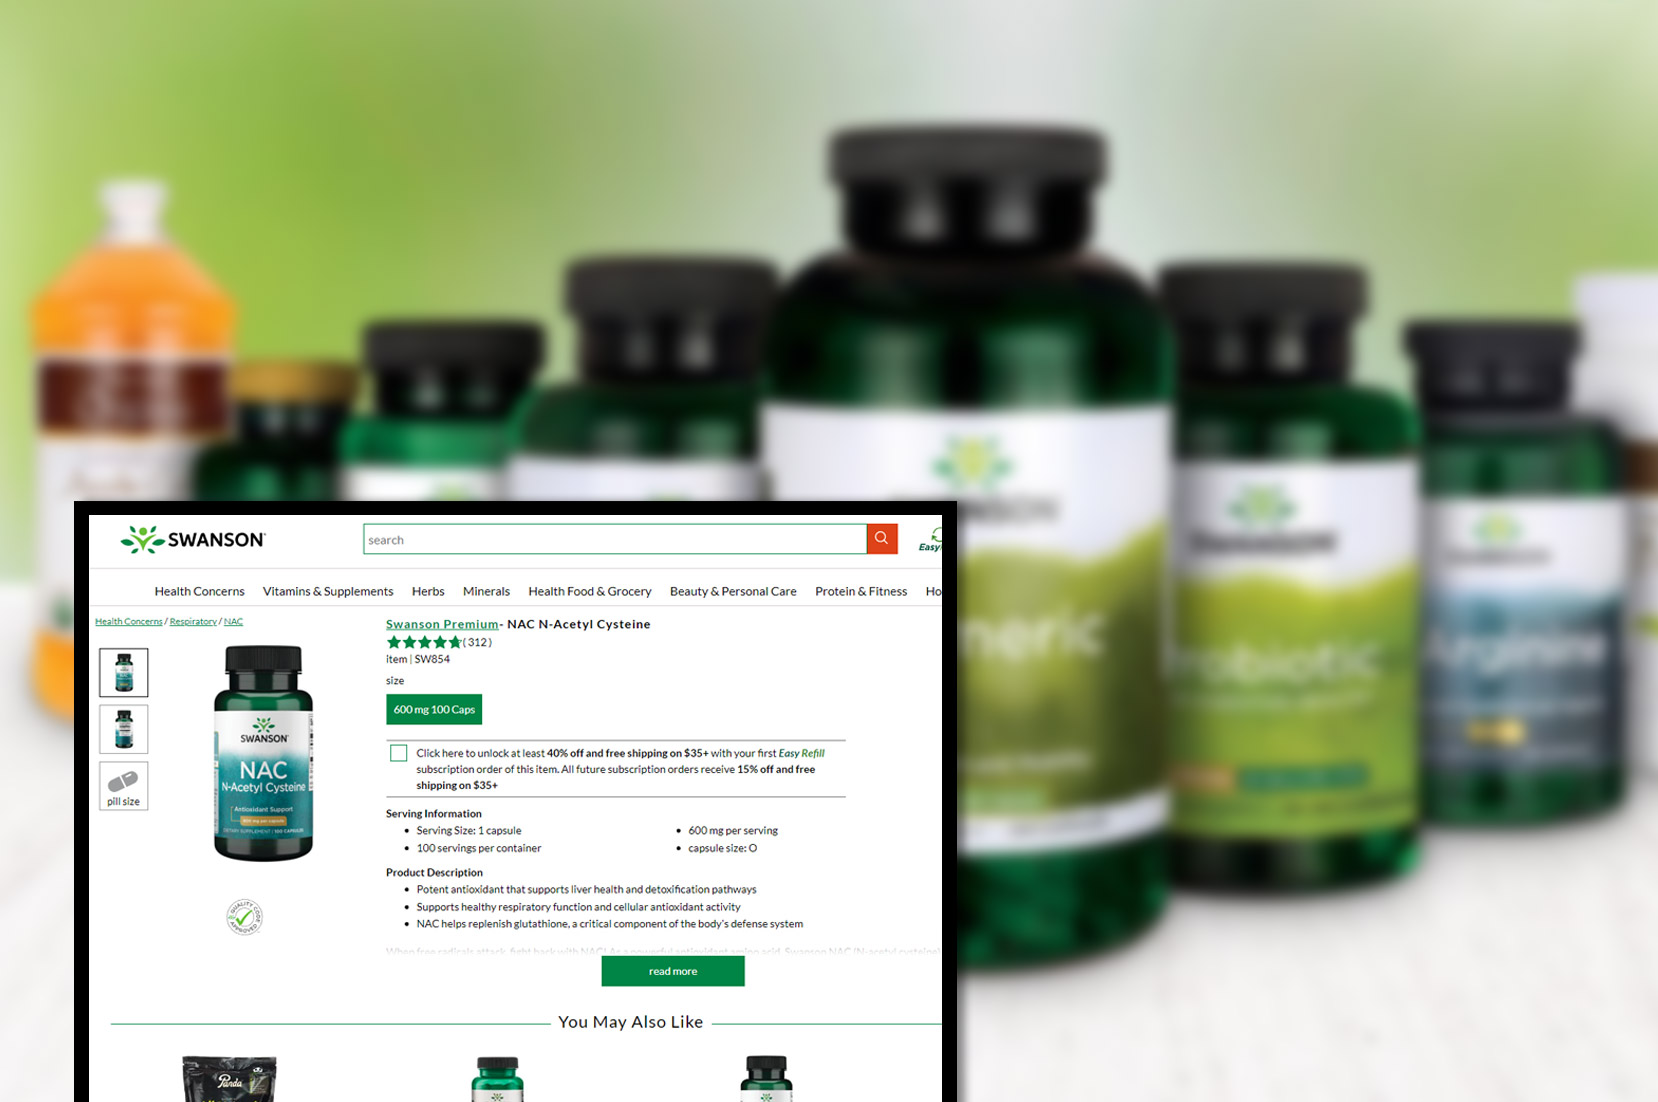 swansonvitamins-comproduct-pricing-information-and-image-scraping-services